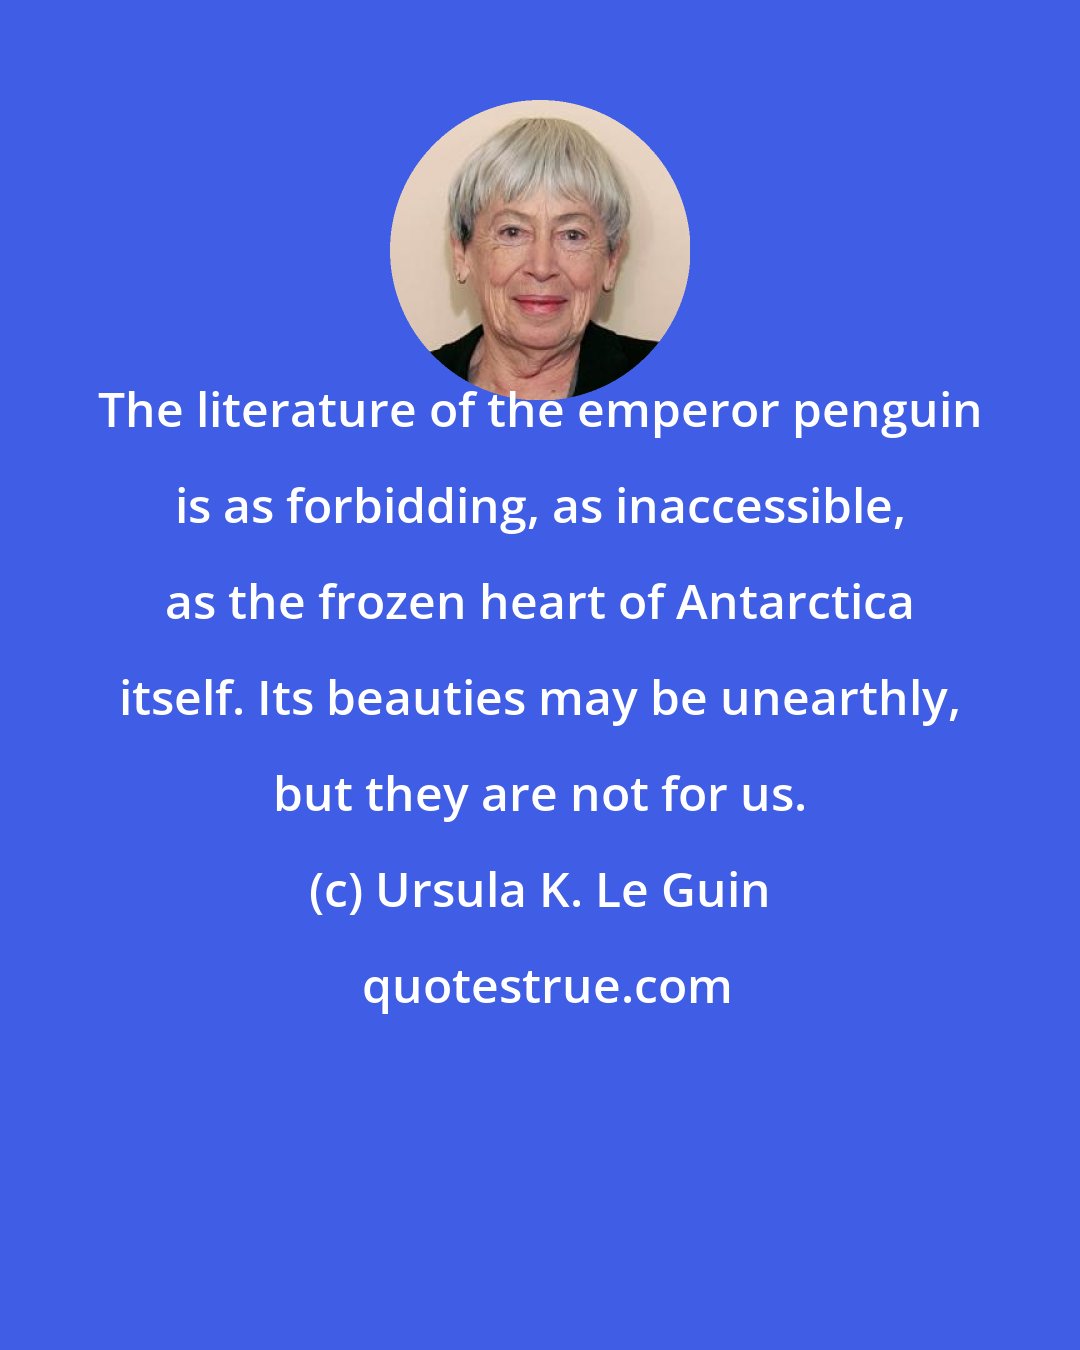 Ursula K. Le Guin: The literature of the emperor penguin is as forbidding, as inaccessible, as the frozen heart of Antarctica itself. Its beauties may be unearthly, but they are not for us.